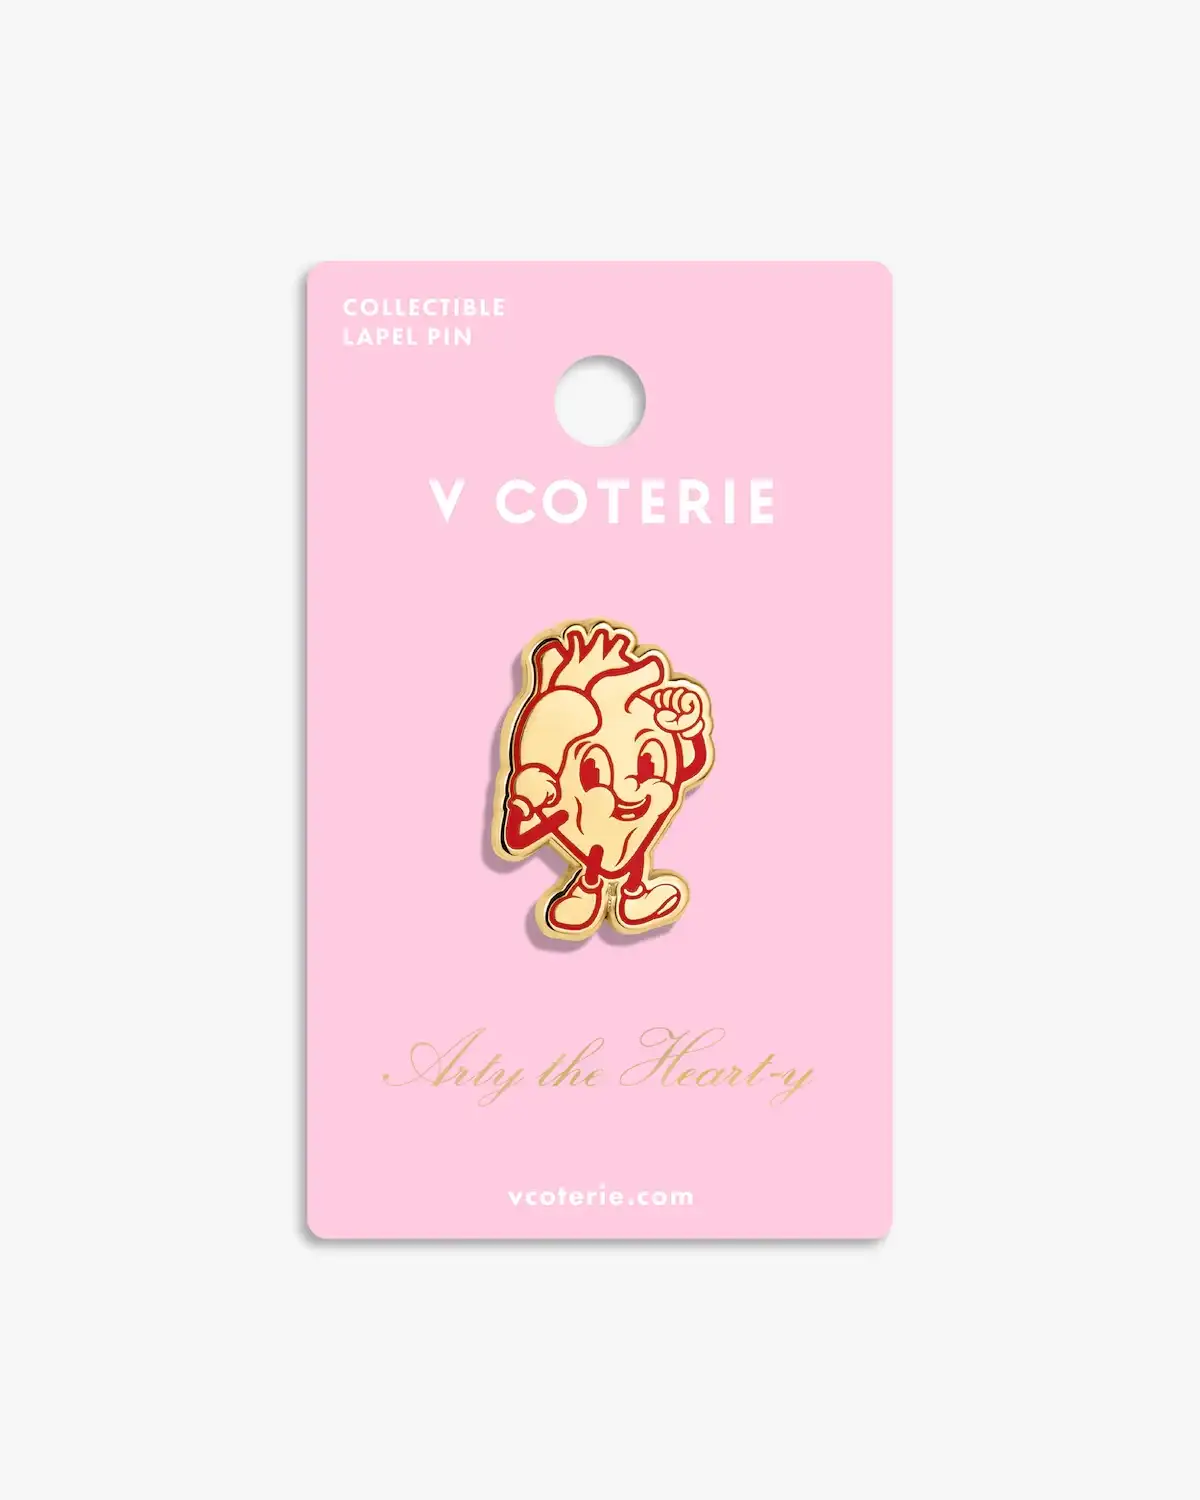 Image of Arty the Heart-y Lapel Pin